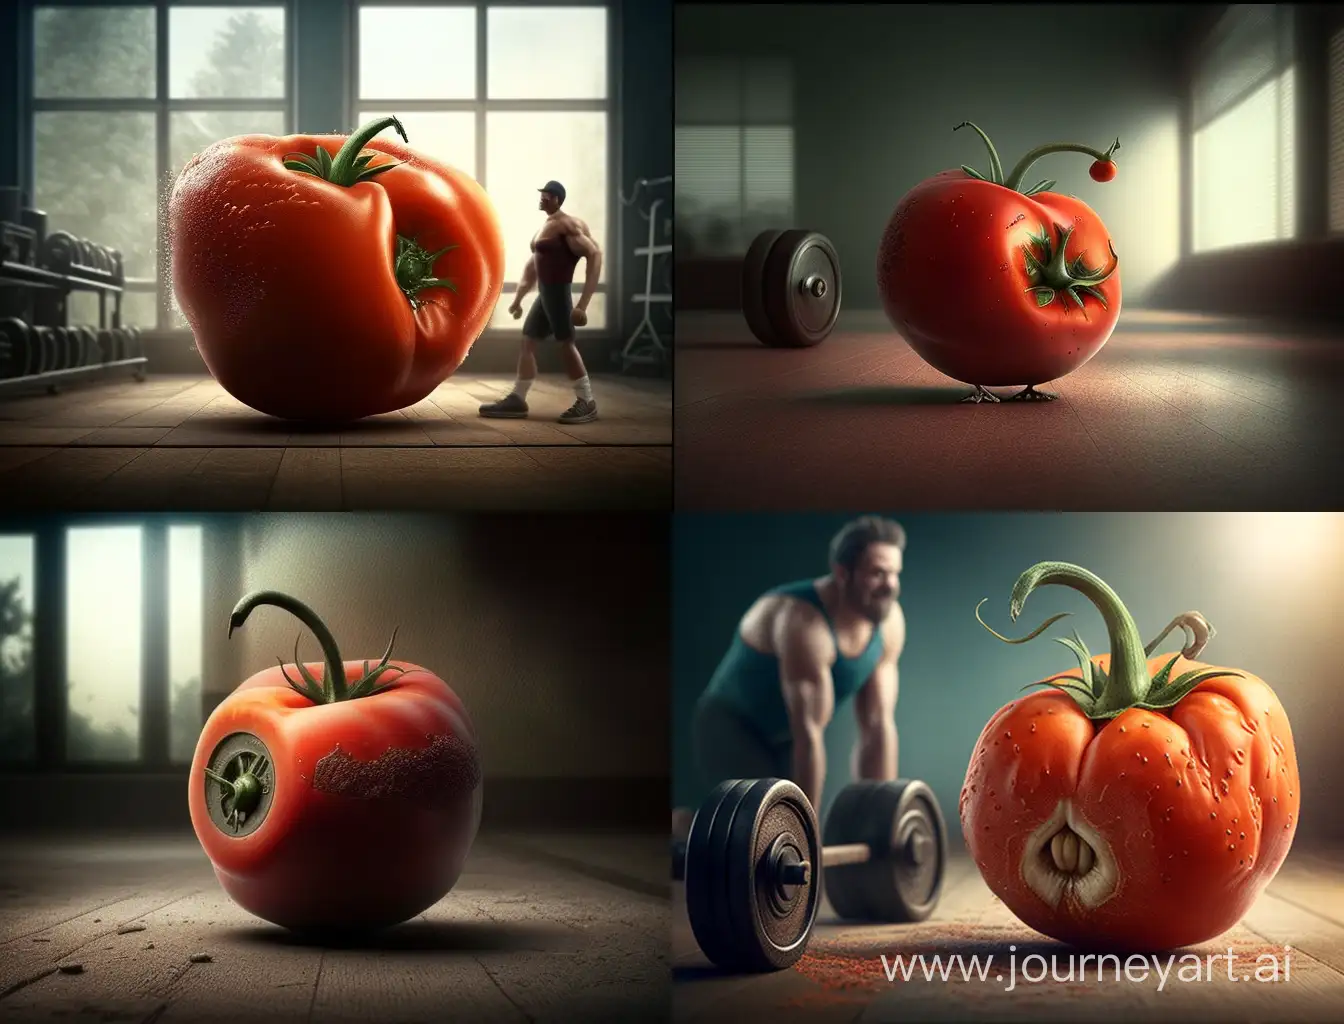 Healthy-Workout-Tomato-Training-Session-at-the-Gym